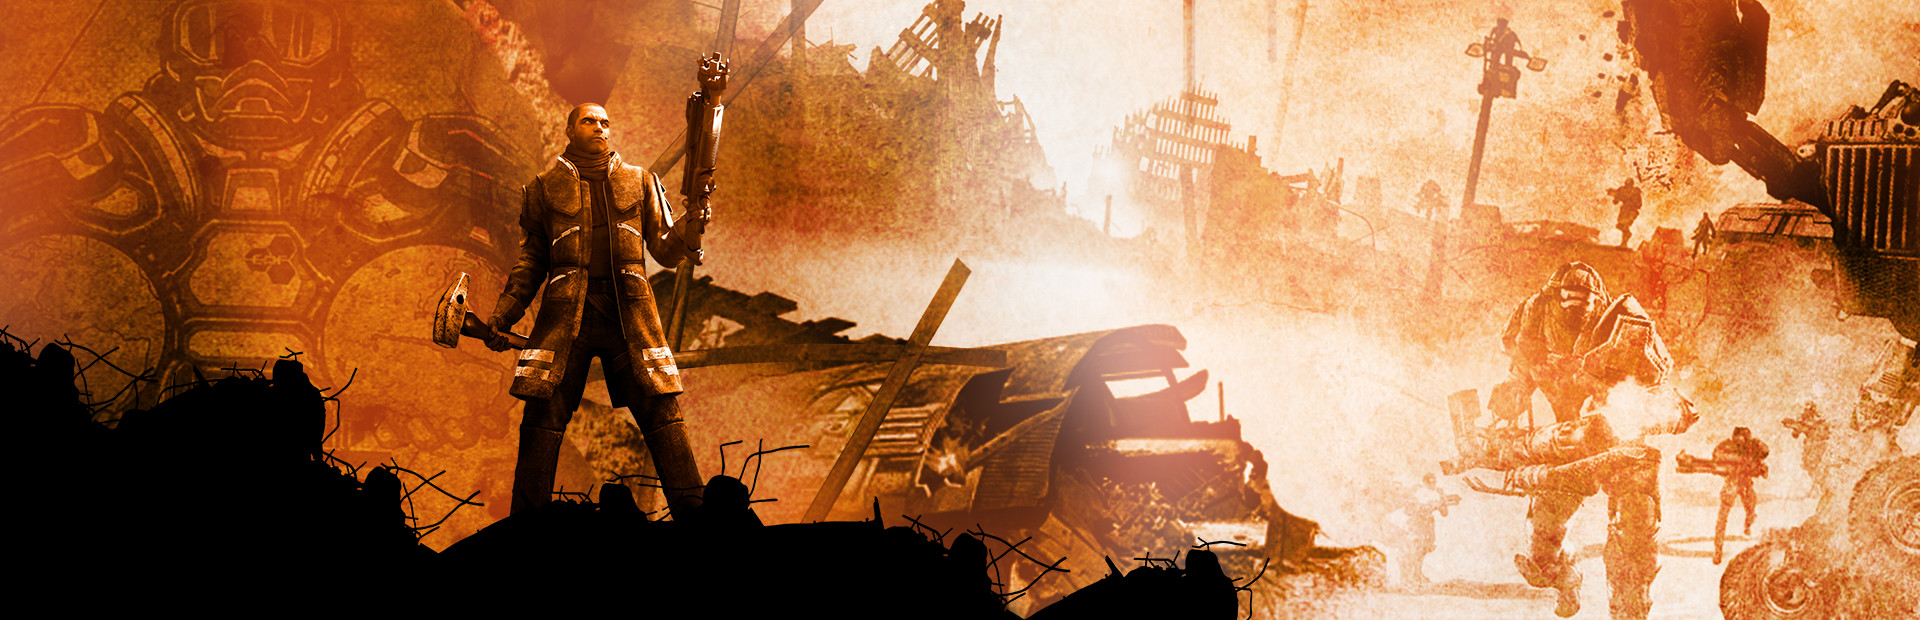 Red Faction Guerrilla Steam Edition cover image